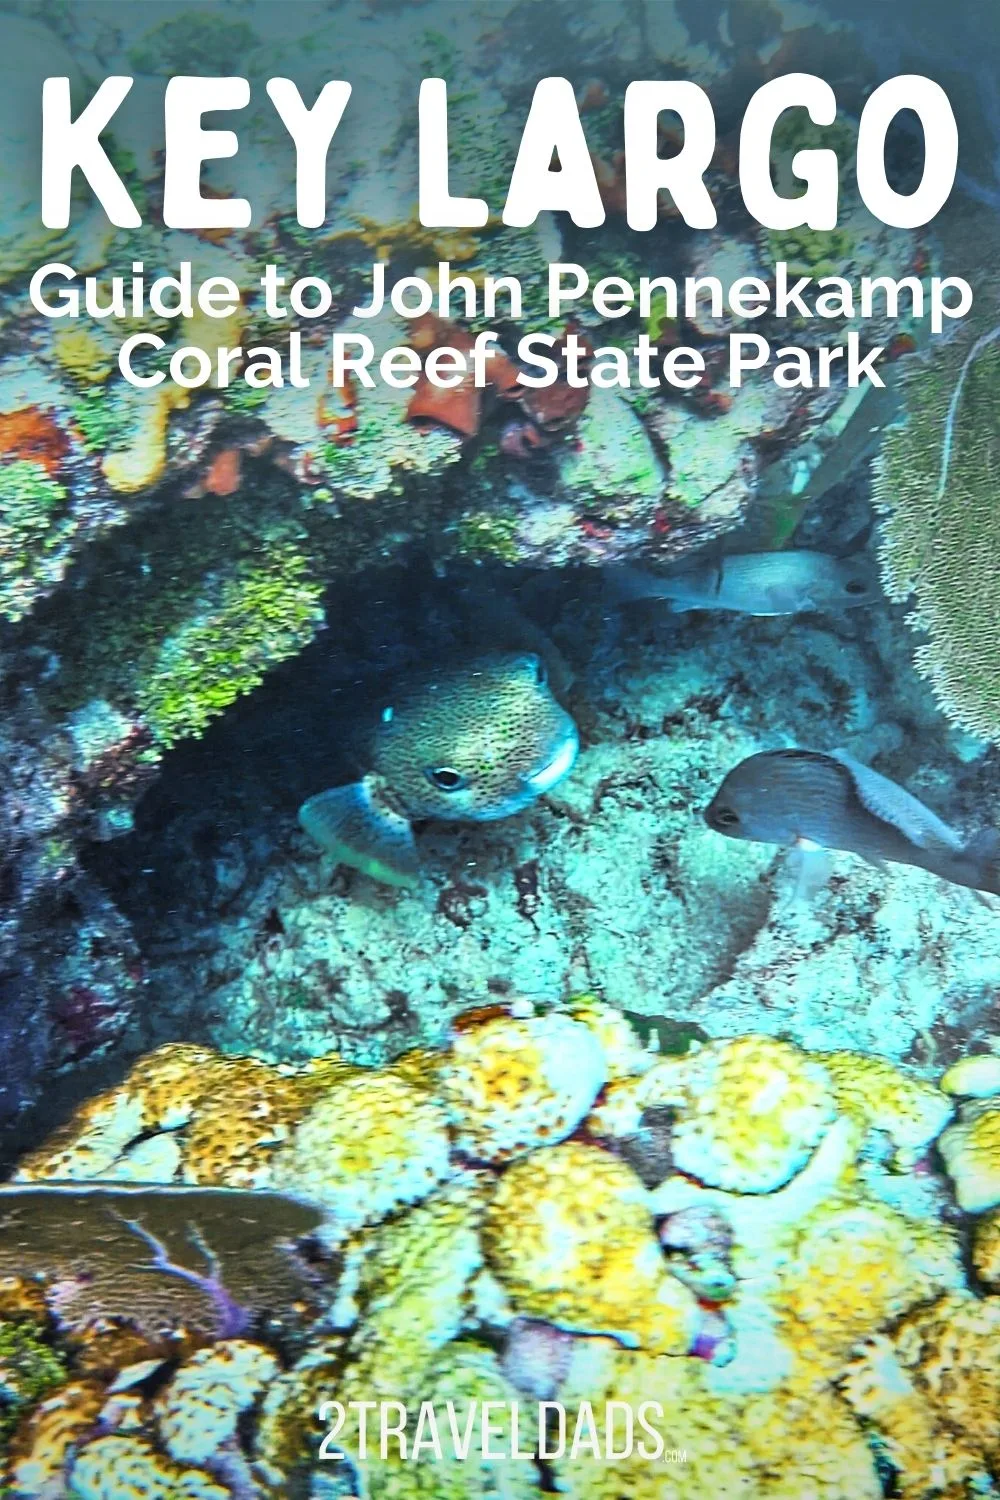 John Pennekamp Coral Reef State Park is located in Key Largo, in the upper Florida Keys.  If you are looking for a great place for water activities this is the perfect spot! 